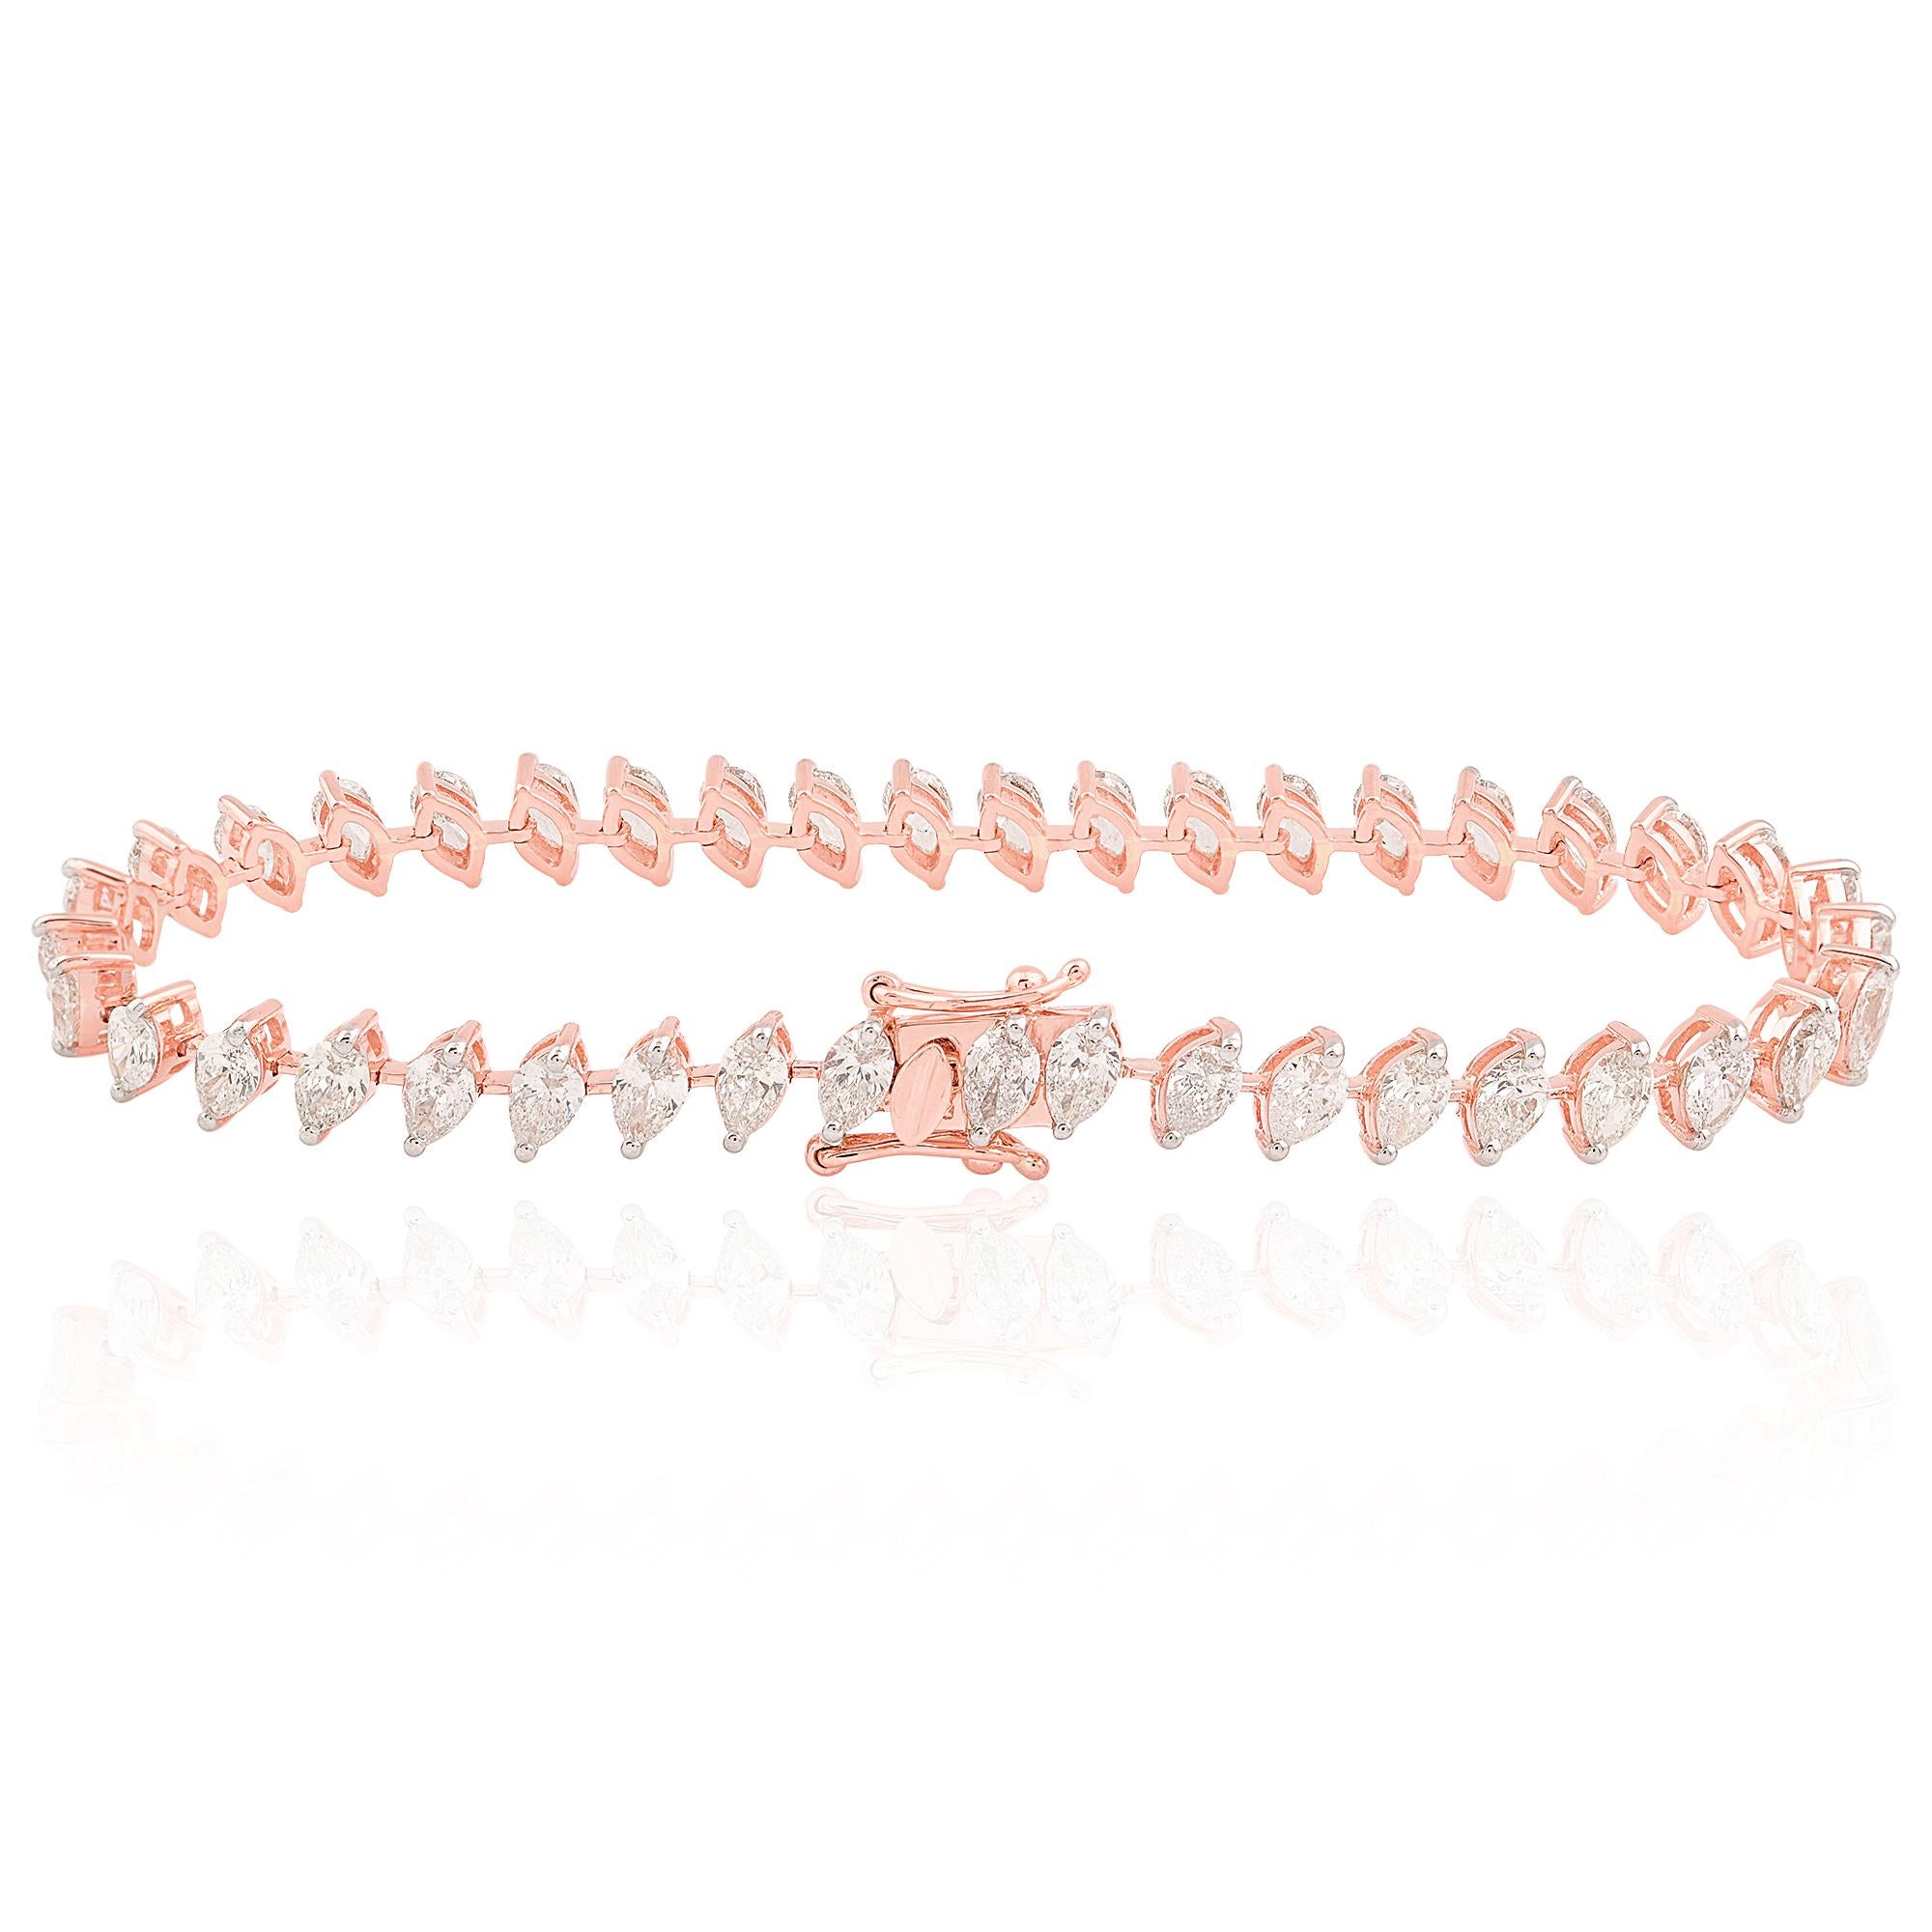 Crafted with the utmost precision and attention to detail, this bracelet exemplifies fine craftsmanship. The setting is meticulously crafted to ensure the diamond is held securely in place while allowing maximum light to enter and illuminate the